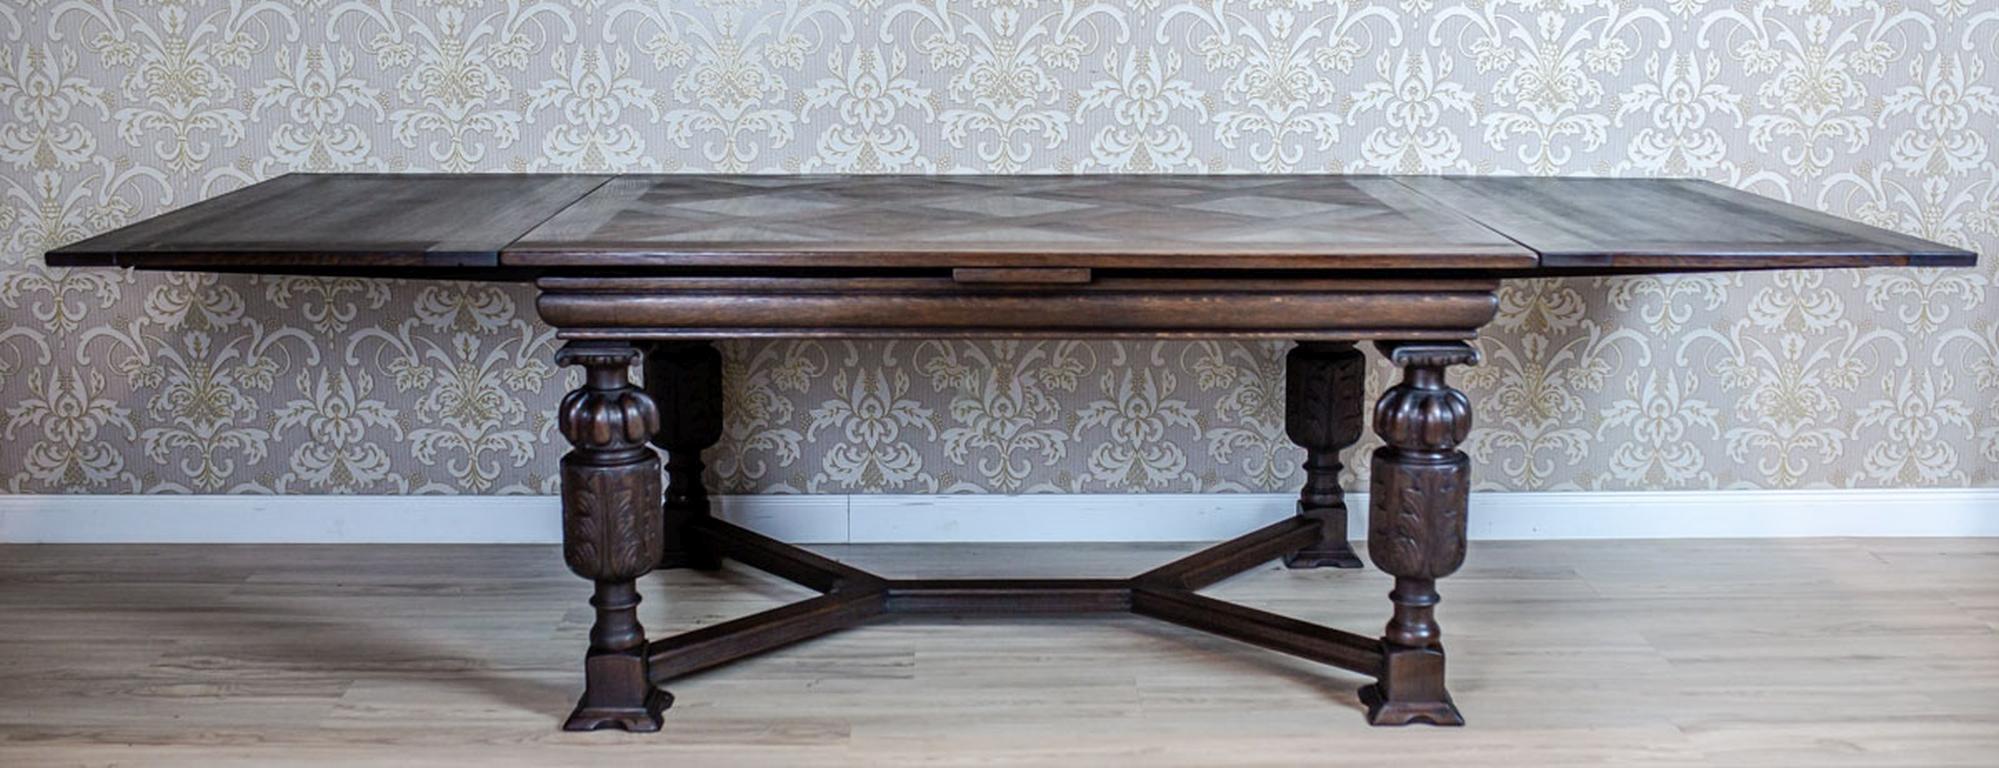 We present you a big antique extendable table made entirely of oakwood.
The top is supported on four rounded legs, which are decorated with carved patterns and connected with Y-shaped stretchers.

This table is after renovation and has been